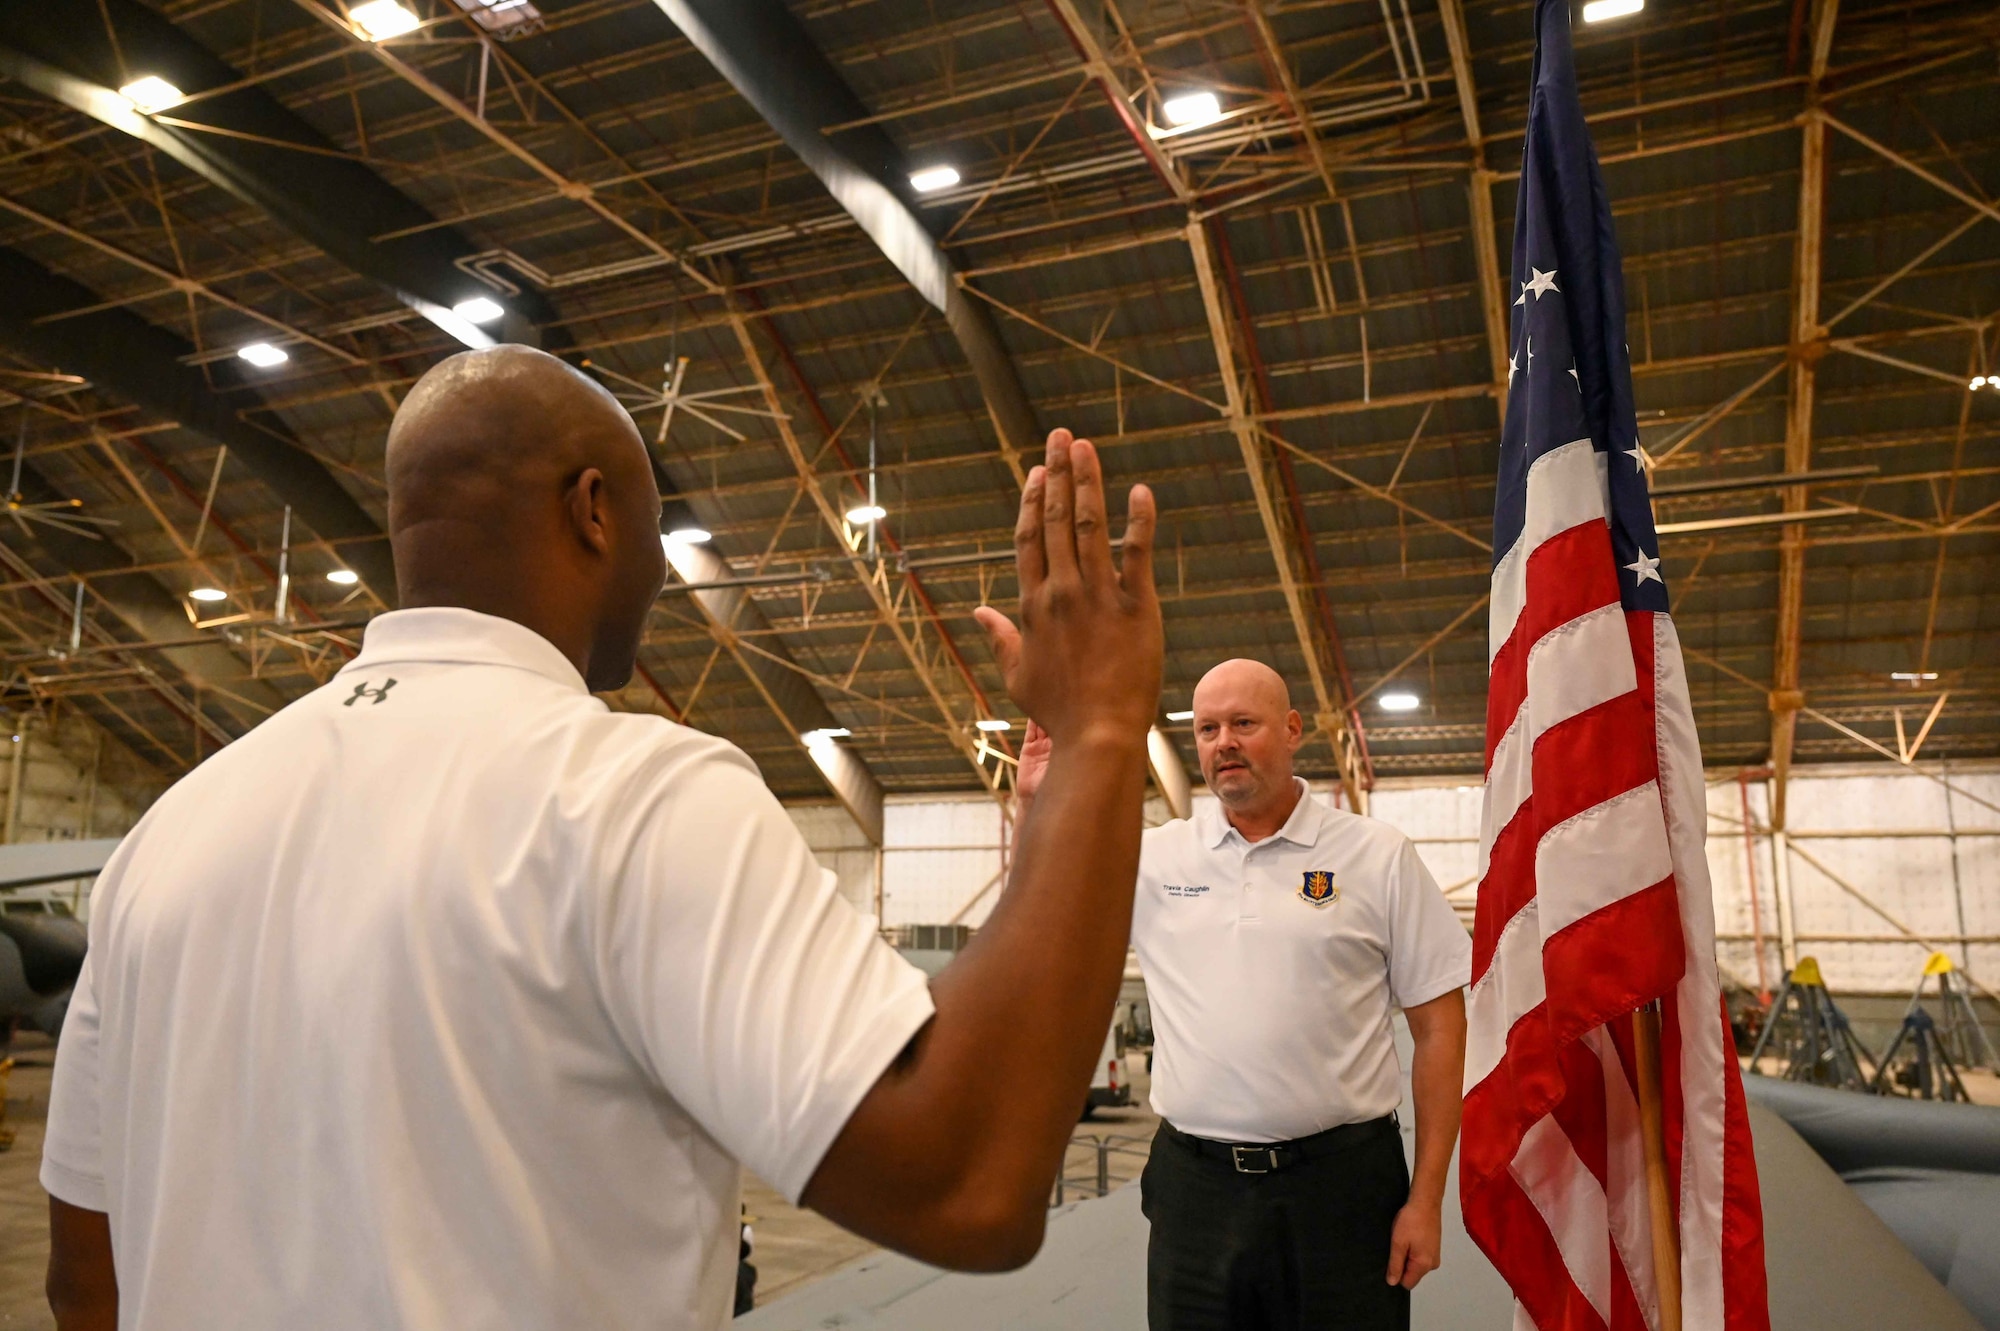 Travis Coughlin, right, 97th Maintenance Group deputy director, administers the oath of enlistment to Jimmel Winkfield, 97th Aircraft Maintenance Squadron (AMXS) deputy director, at Altus Air Force Base, Oklahoma, Dec. 28, 2023. Winkfield has worked in the AMXS since 2017. (U.S. photo by Airman 1st Class Kari Degraffenreed)